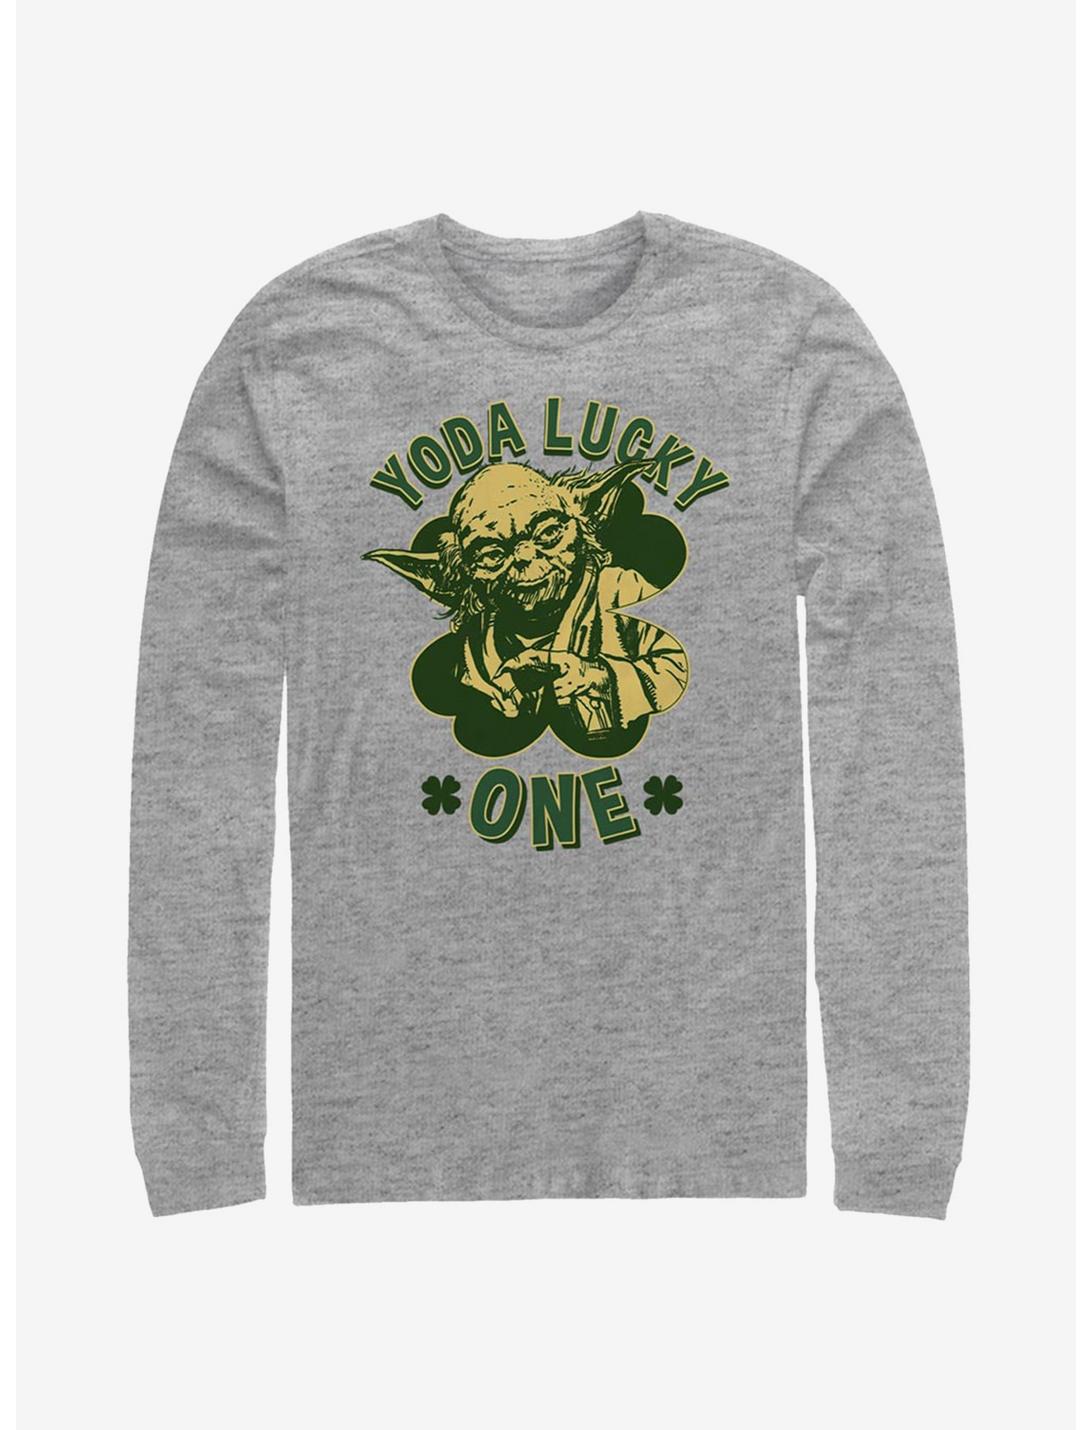 Star Wars Lucky One Long-Sleeve T-Shirt, ATH HTR, hi-res